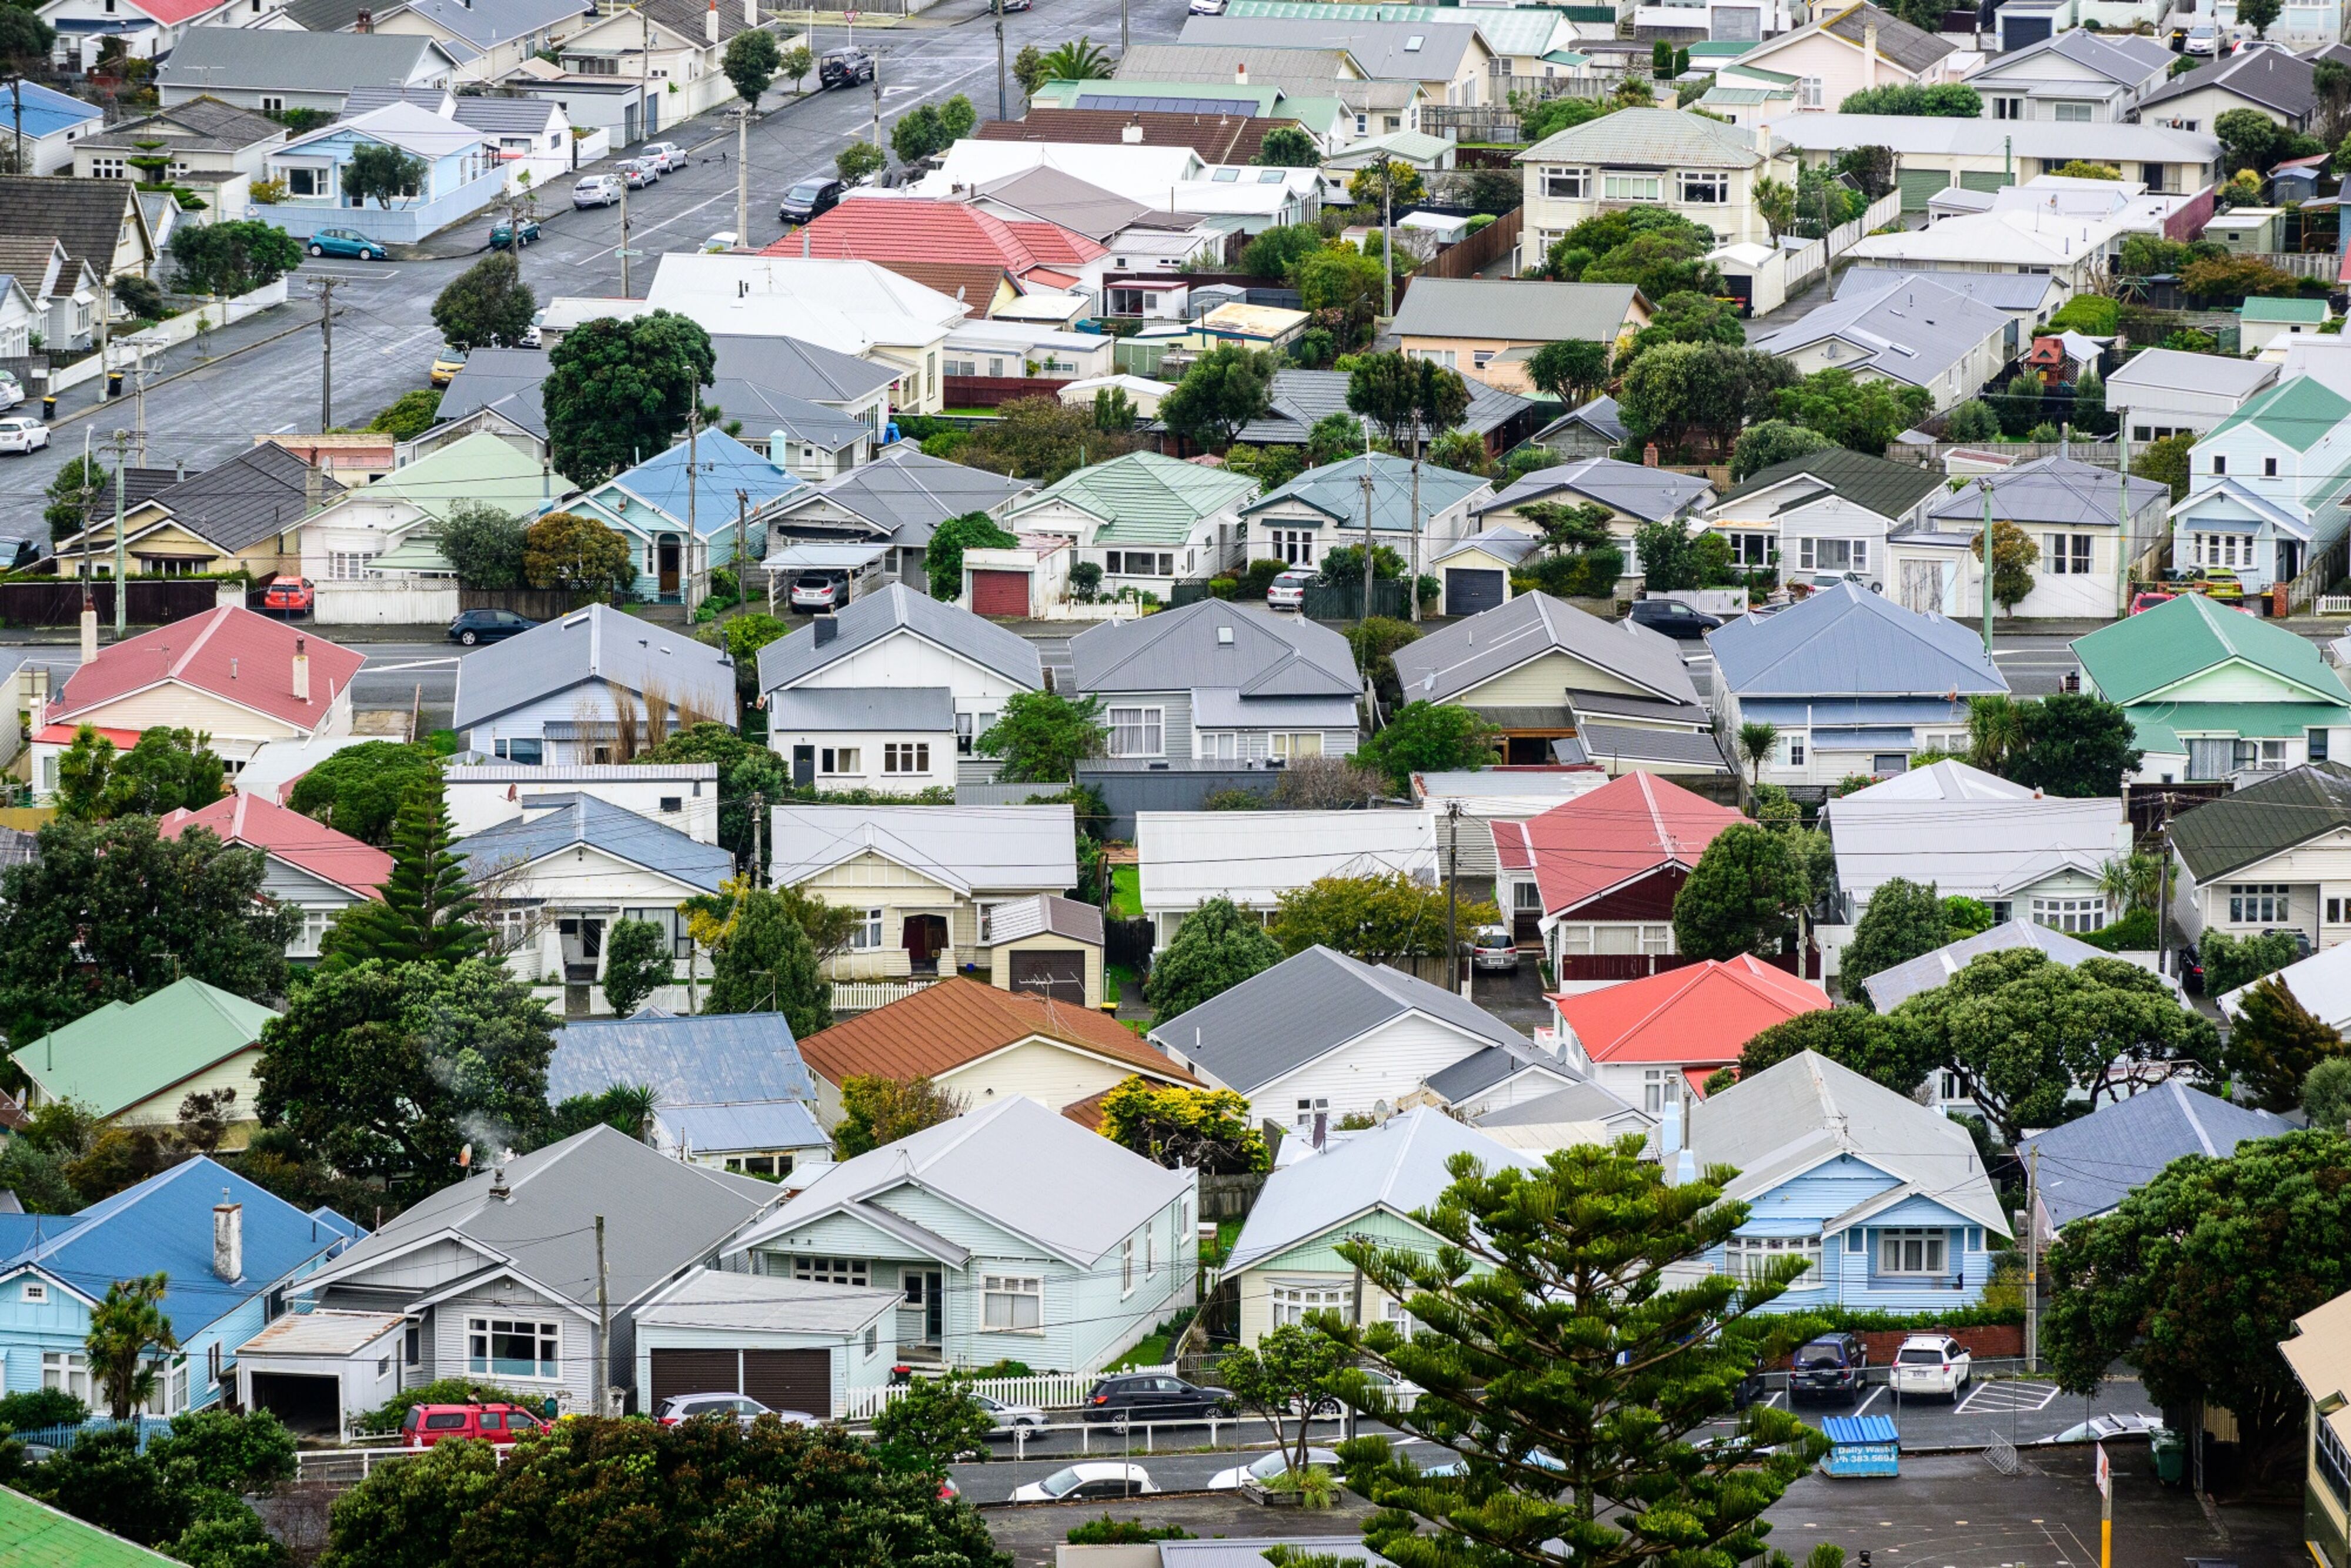 New Zealand's population has risen to its highest level since 1946